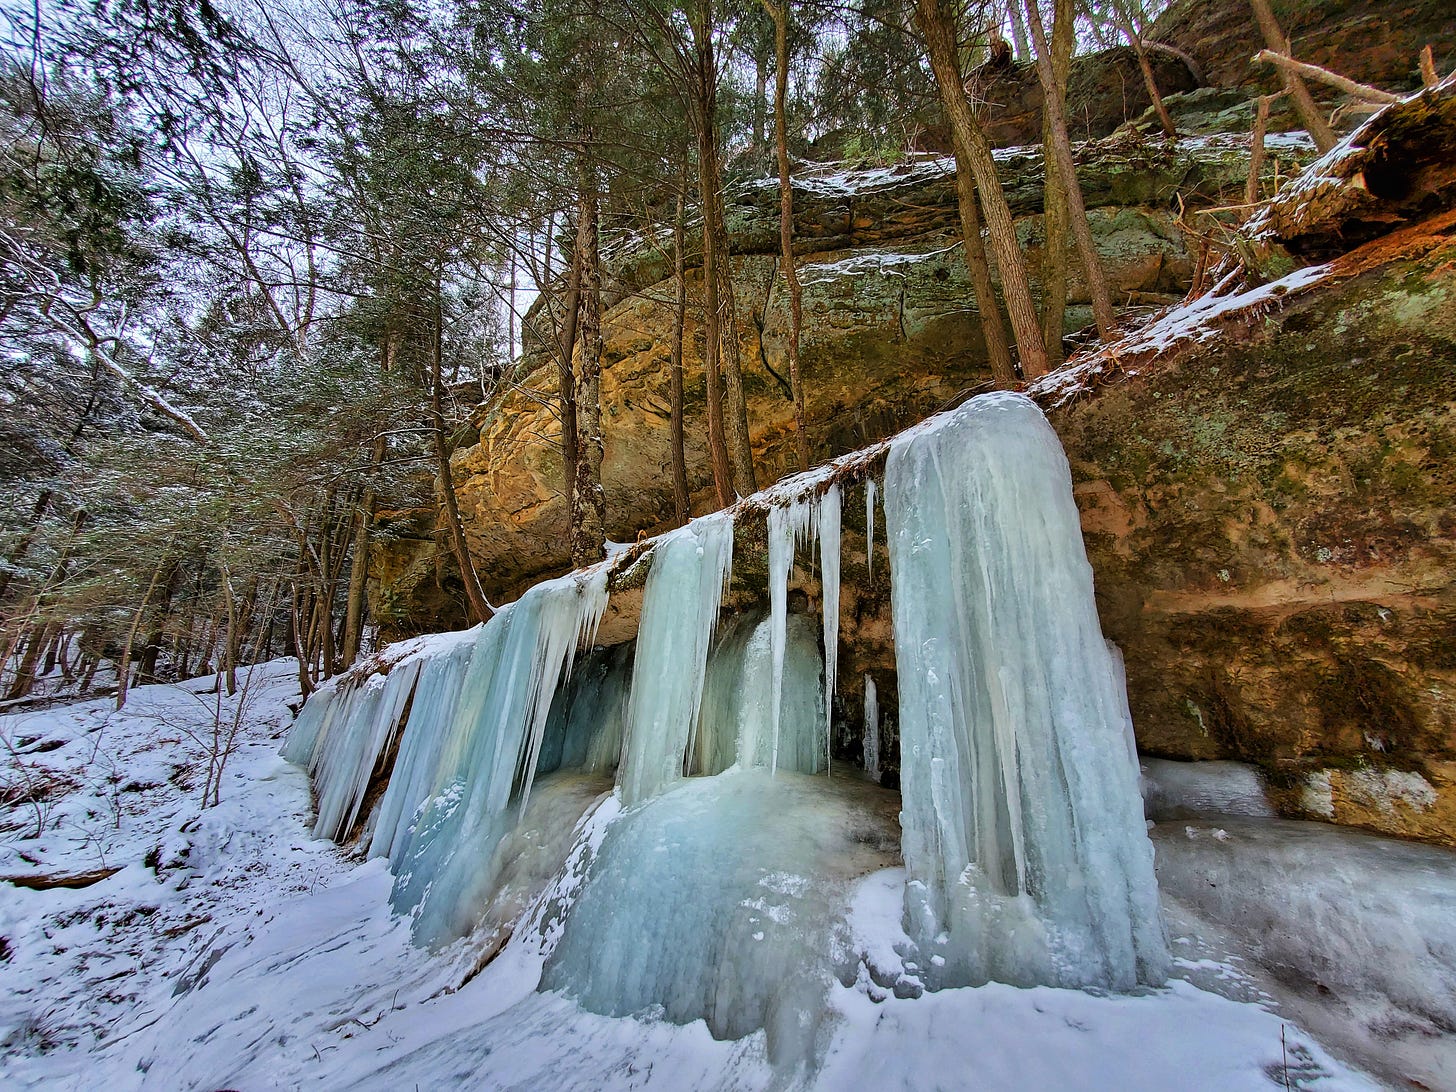 Dramatic ice formations cascade down the side of a limestone bluff, with tall pine trees perched precariously along the ledge at the top. Snow covers the grounw underneath.